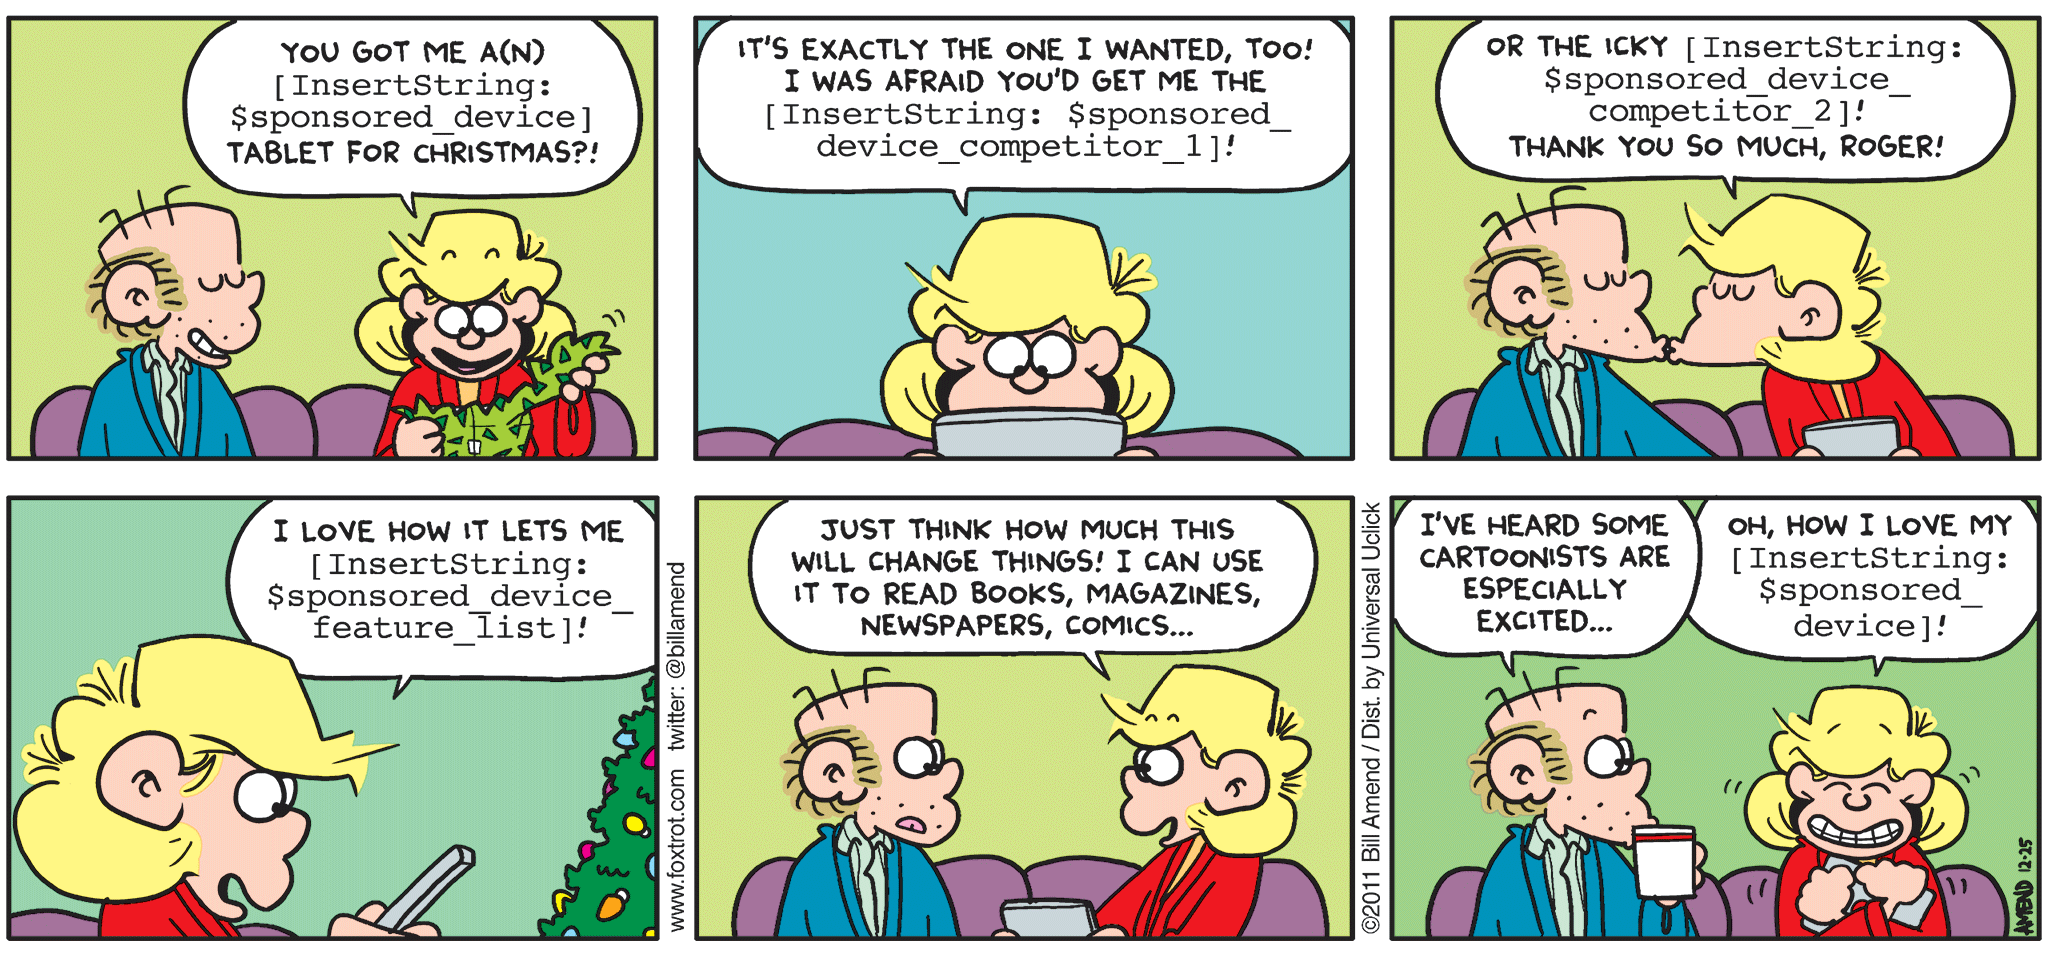 FoxTrot comic strip by Bill Amend - "[InsertString: $sponsored_title]" published December 25, 2011 - Andy: You got me a(n) (InsertString: $sponsored_device) tablet for Christmas?! It's exactly the one I wanted, too! I was afraid you'd get me the (InsertString: $sponsored_device_competitor_1)! Or the icky (InsertString: $sponsored_device_competitor_2)! Thank you so much, Roger! I love how it lets me (InsertString: $sponsored_device_feature_list)! Just think how much this will change things! I can use it to read books, magazines, newspapers, comics... Roger: I've heard some cartoonists are especially excited... Andy: Oh, how I love my (IndsertString: $sponsored_device)!